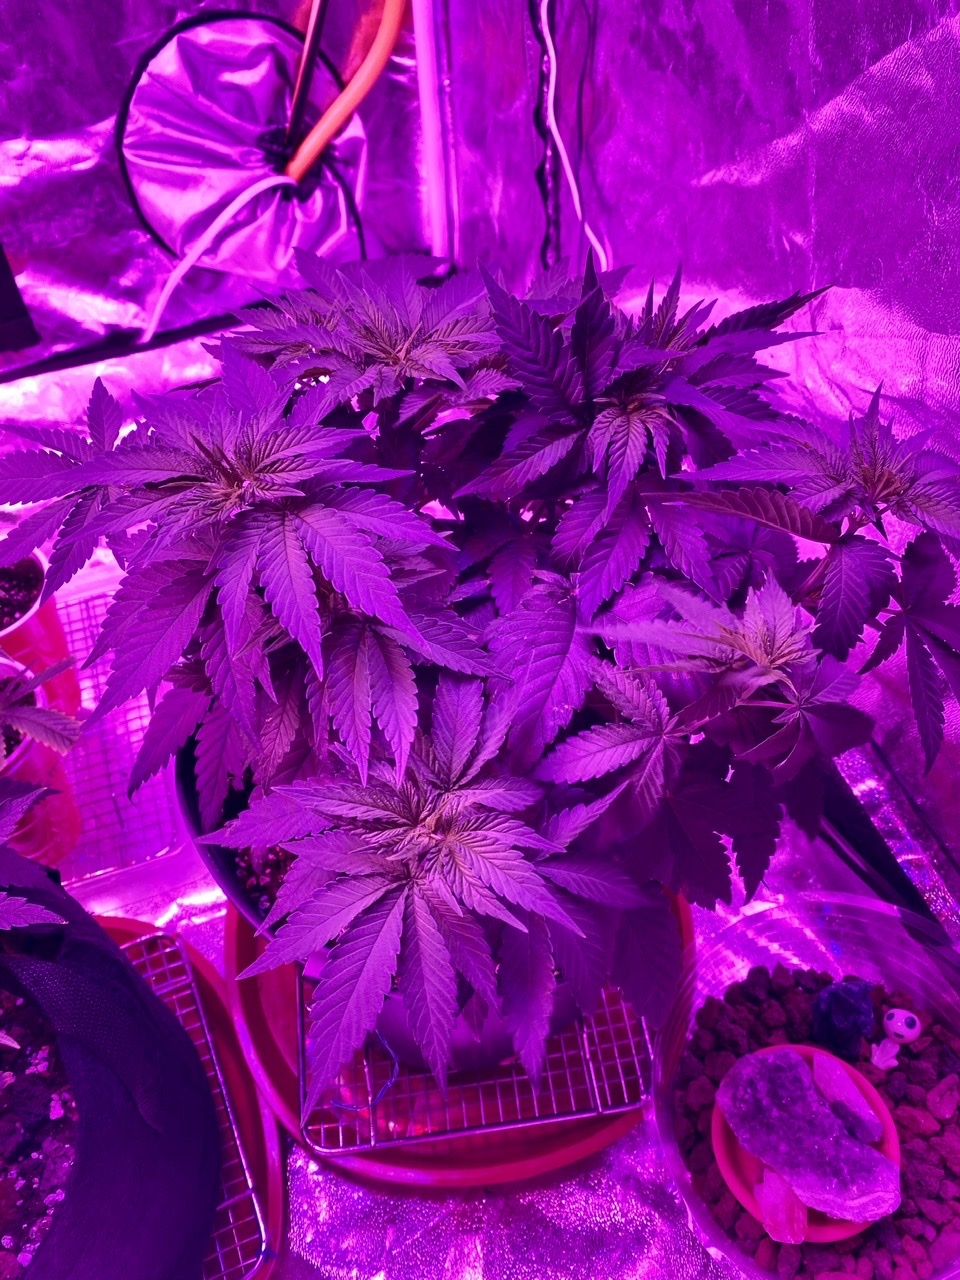 Quick update after lst and feedings thanks for all the knowledge ive found here happy growing 4